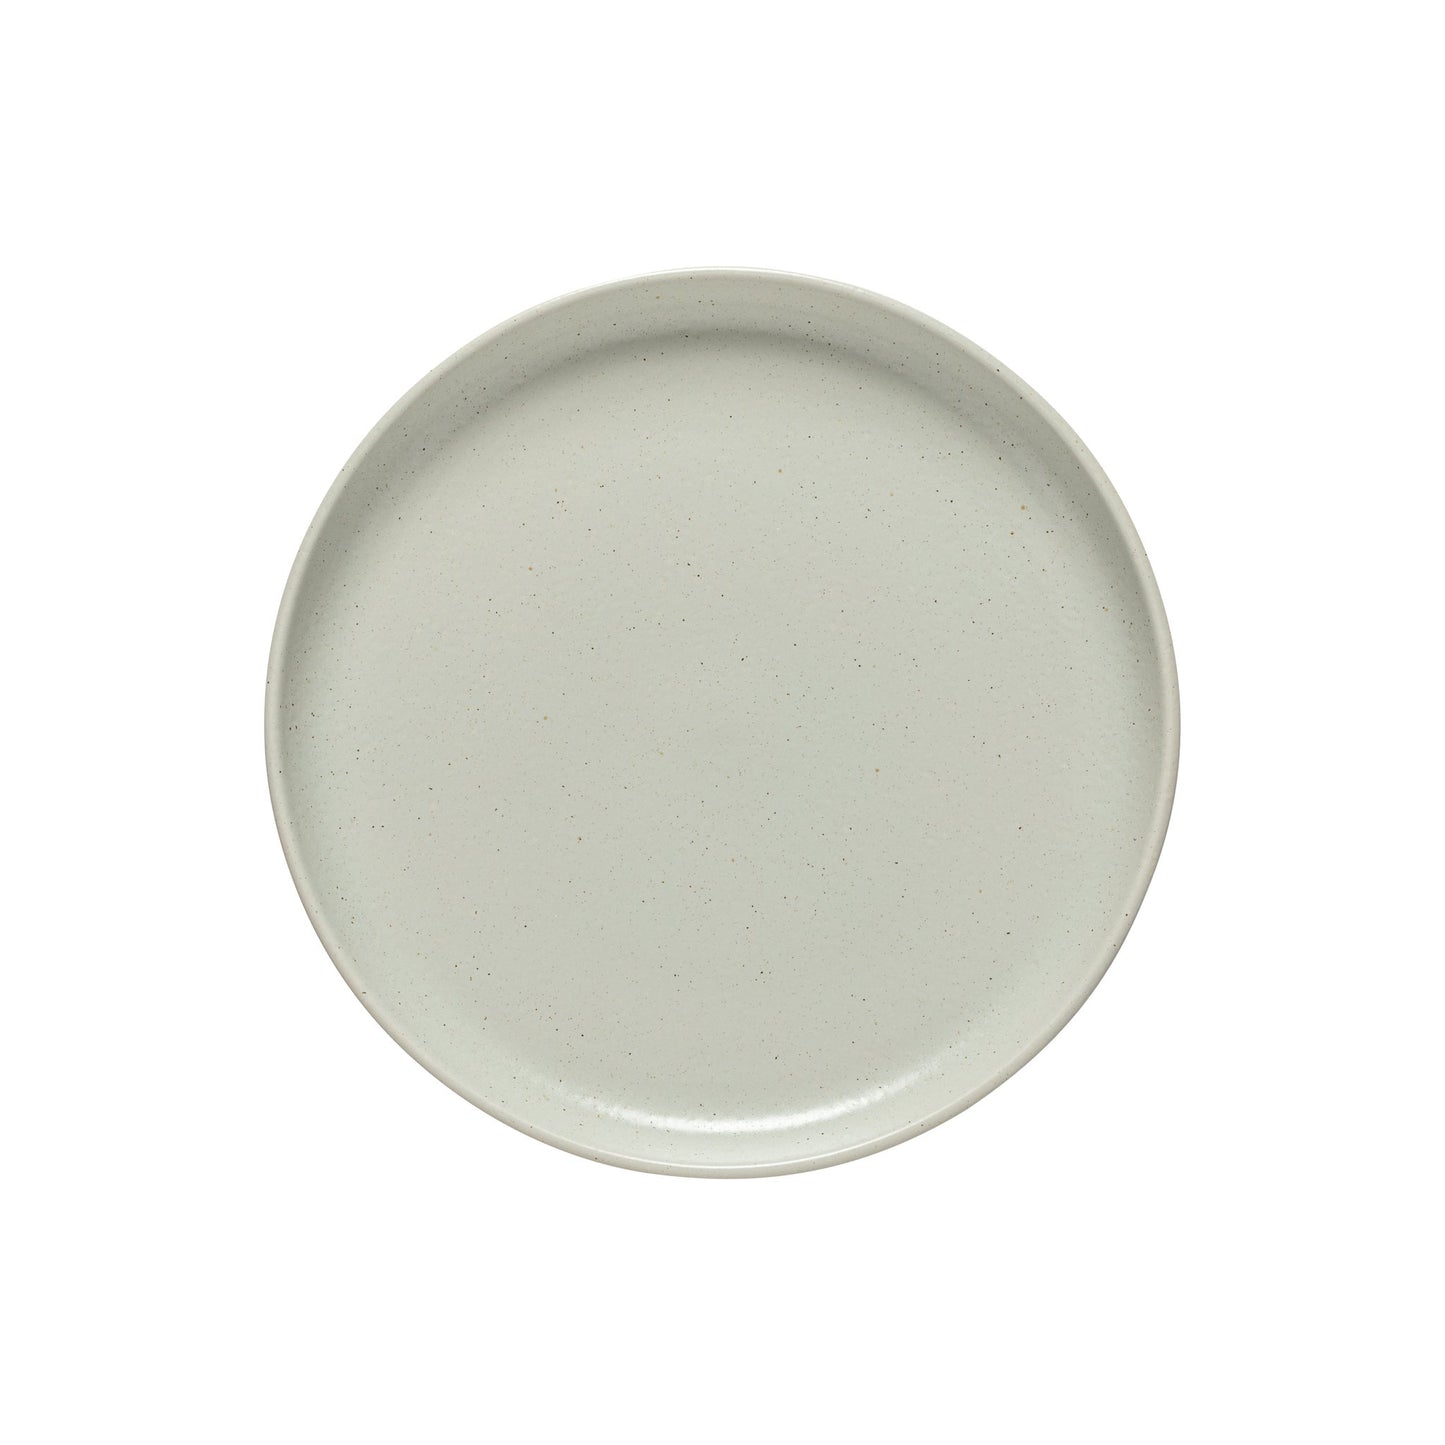 Pacifica Oyster Grey Dinner plate